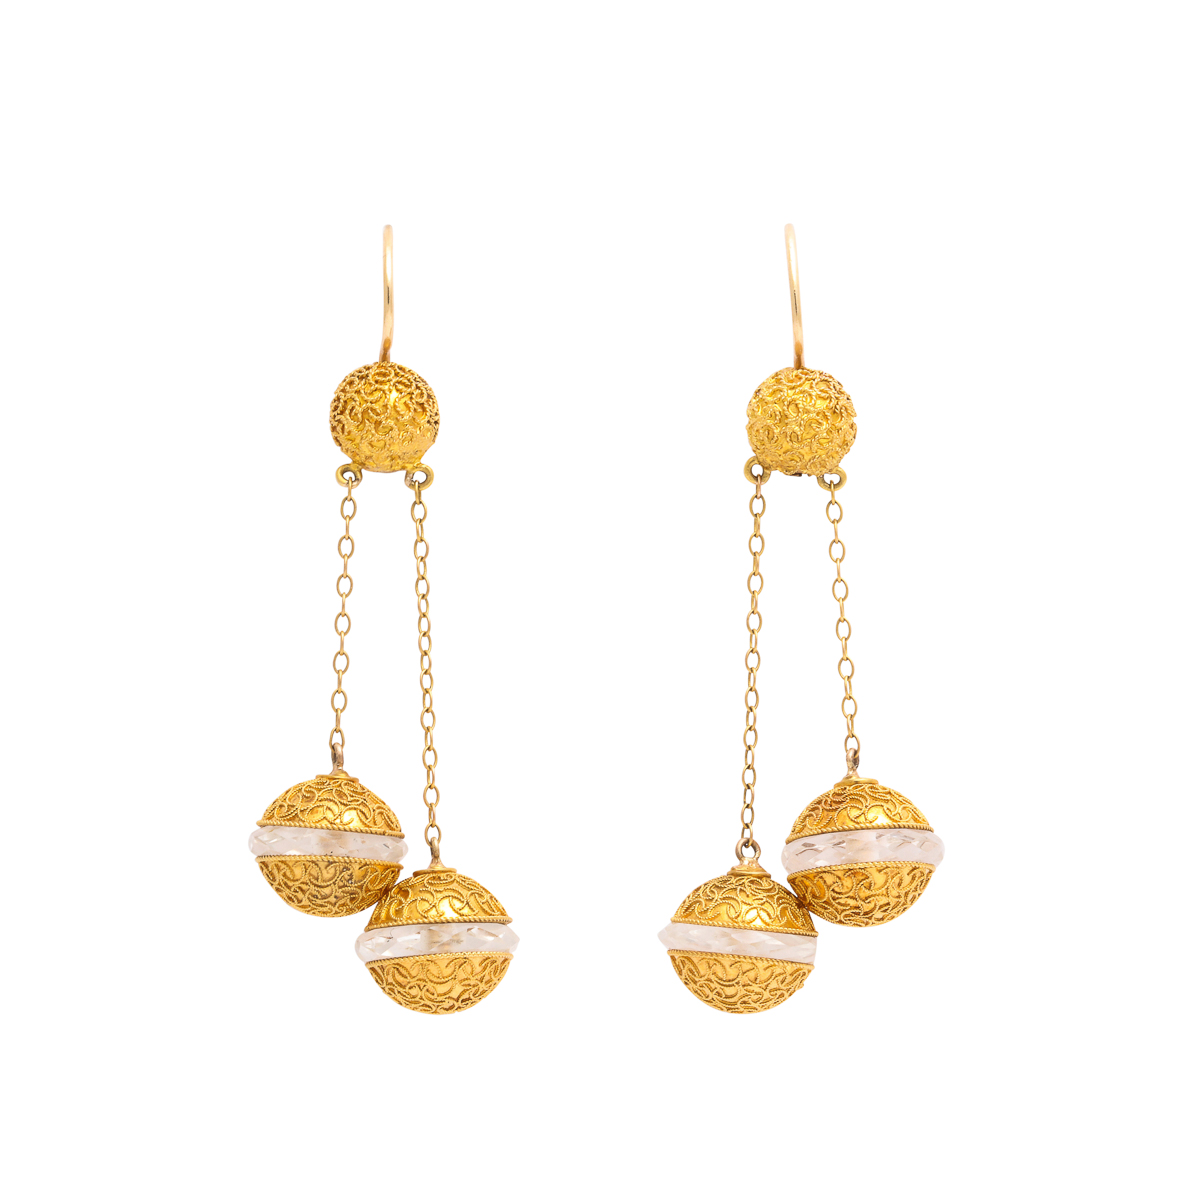 Antique gold double pendant earrings, each gold ball drop designed with a band of faceted rock crystal